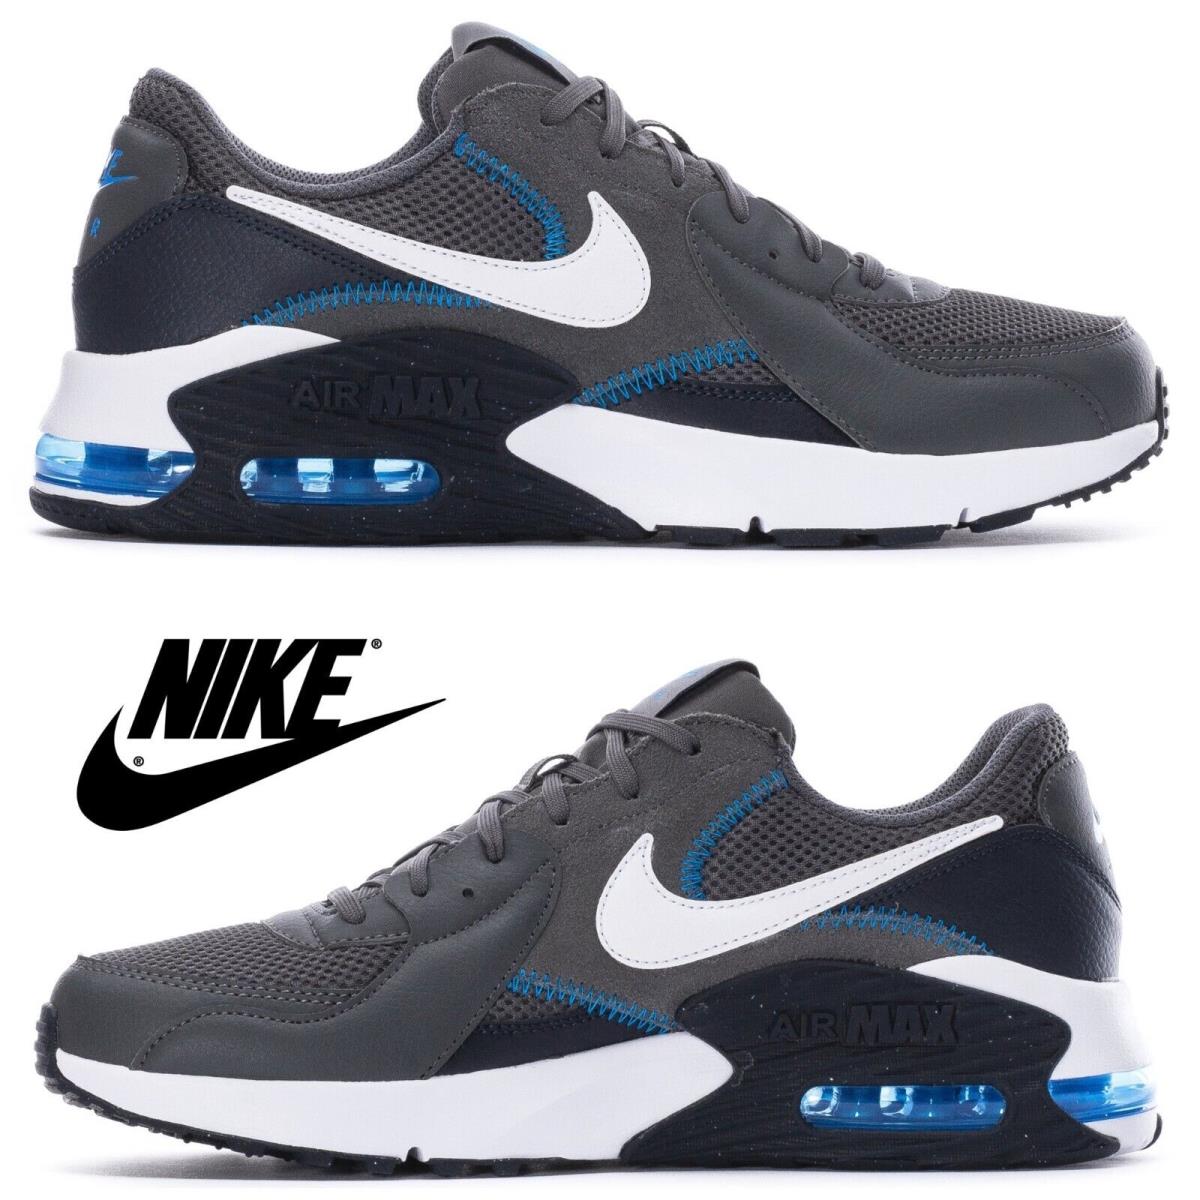 Nike Air Max Excee Men`s Sneakers Comfort Casual Sport Running Shoes Gray